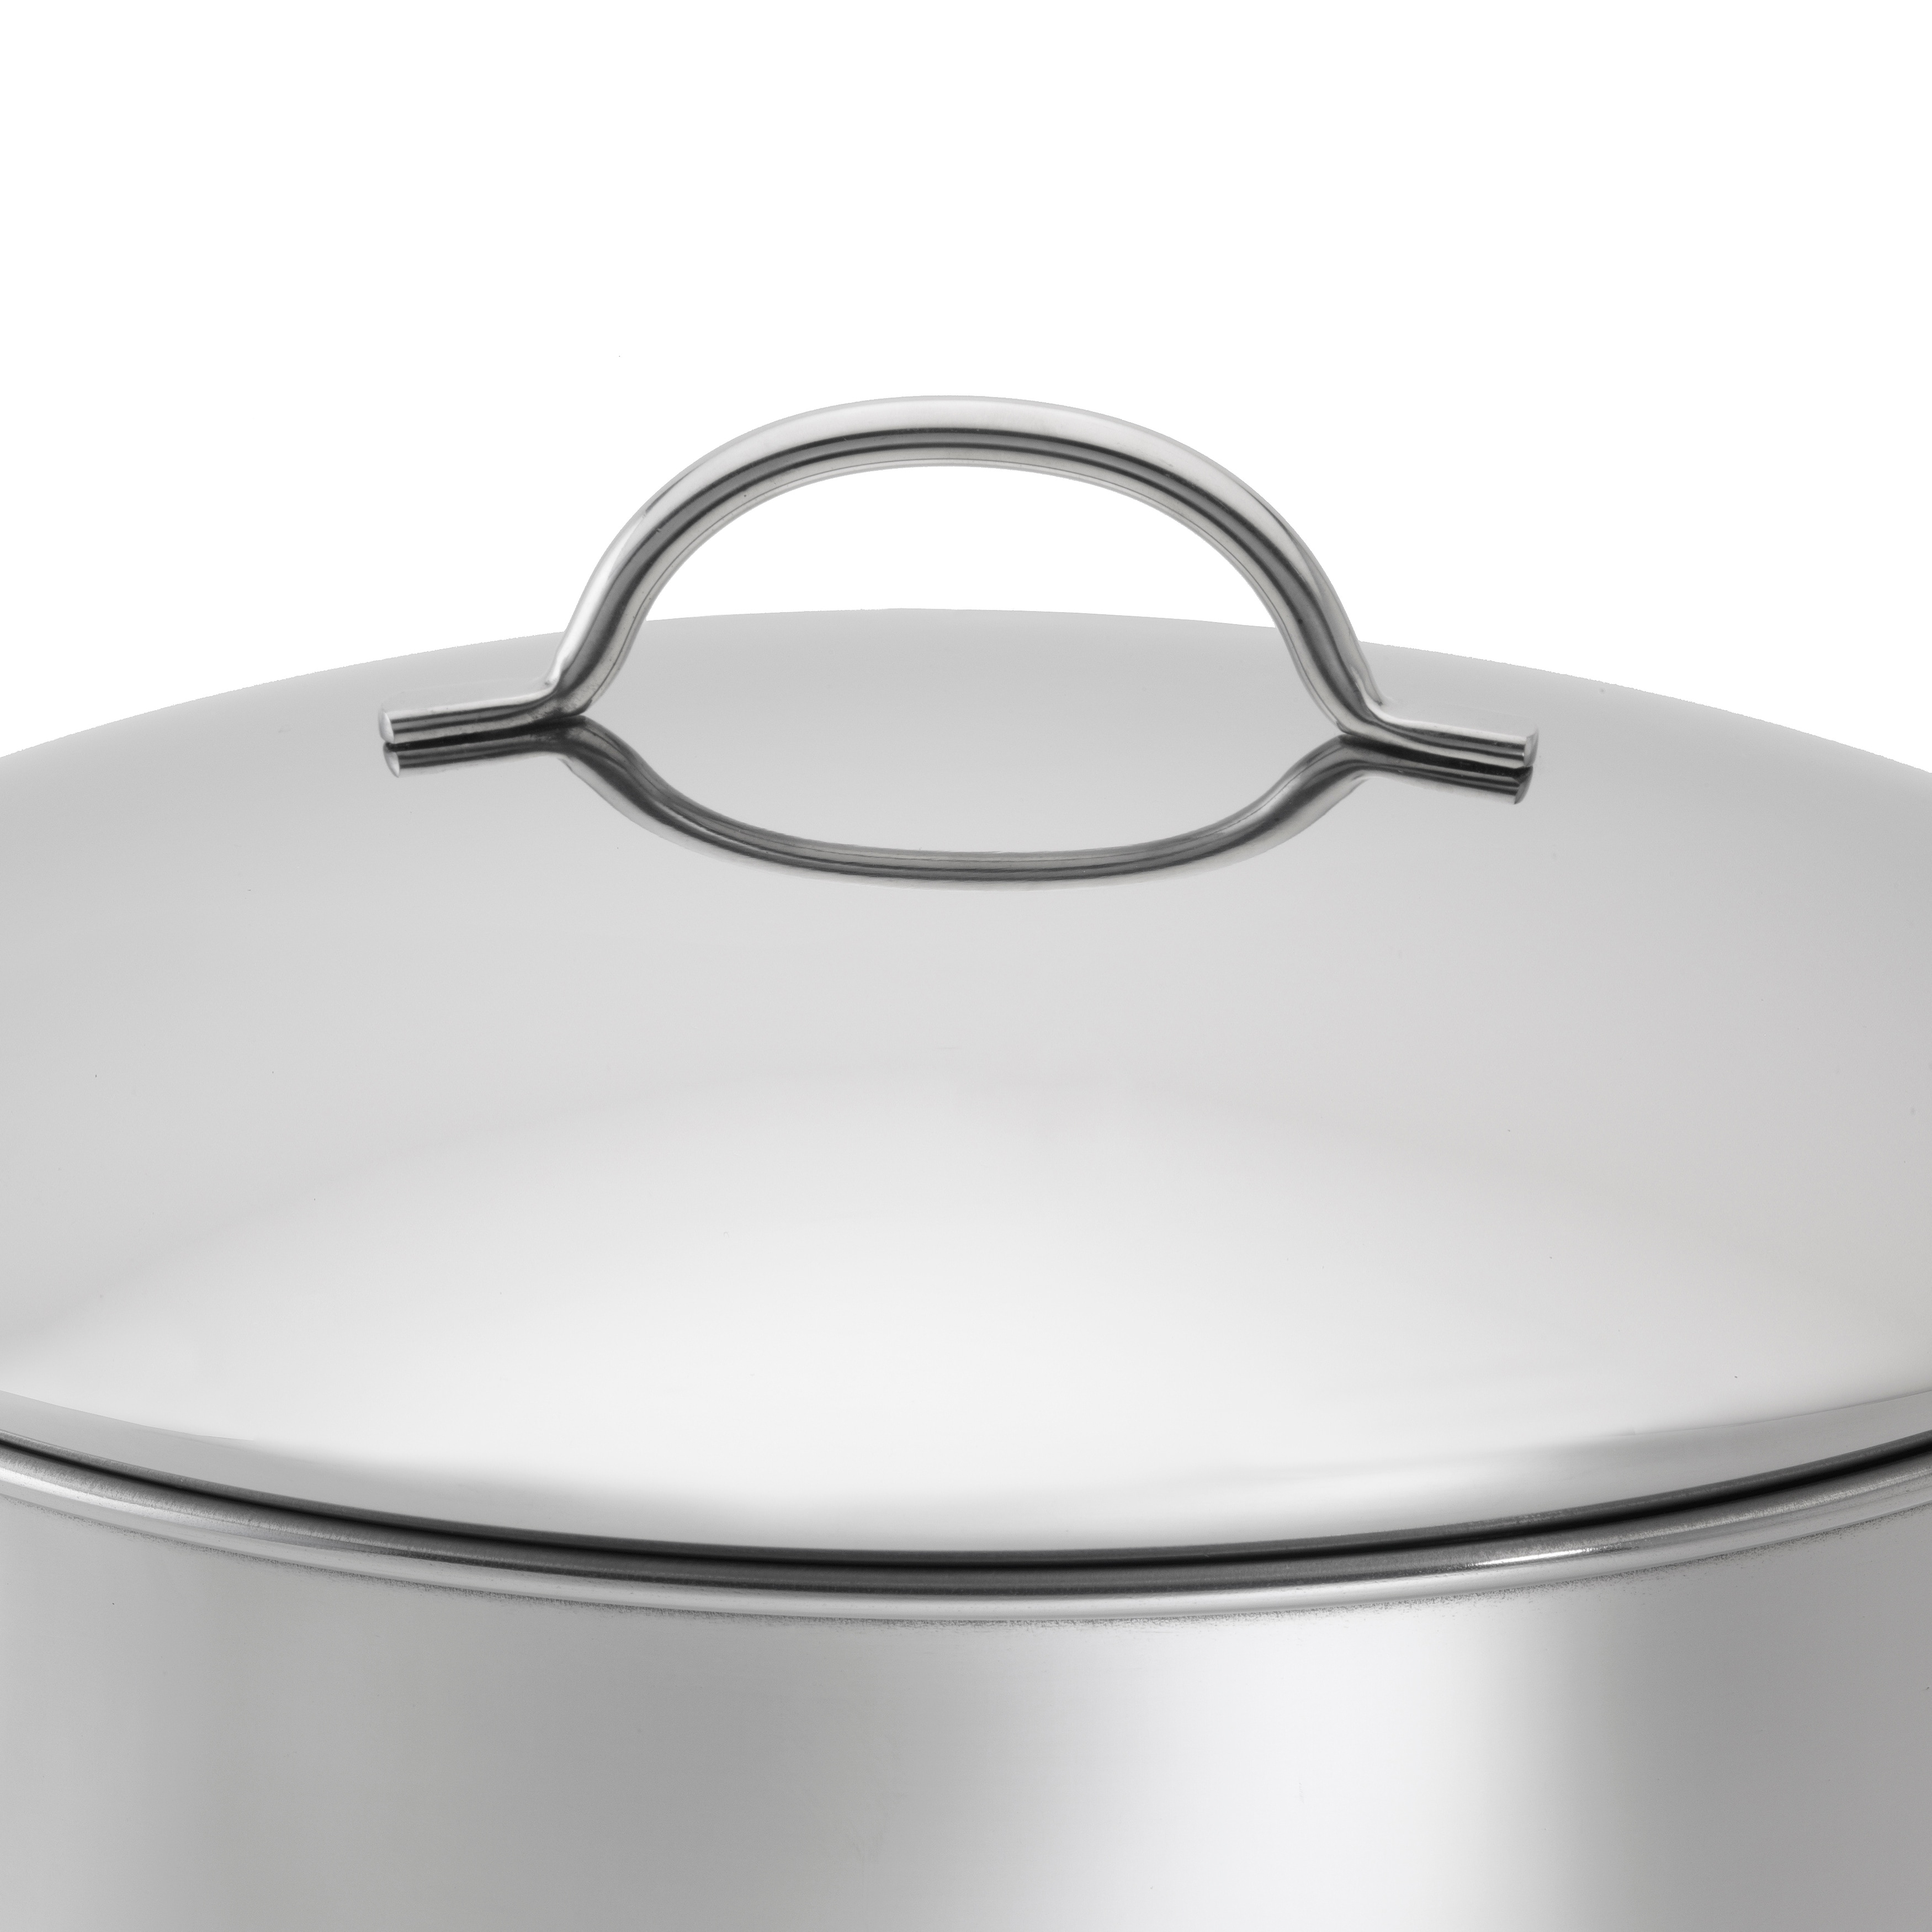 https://ak1.ostkcdn.com/images/products/is/images/direct/23959b24e9593d22236926a17f10970db90ad0f0/Farberware-Classic-Stainless-Steel-16-quart-Covered-Stockpot.jpg